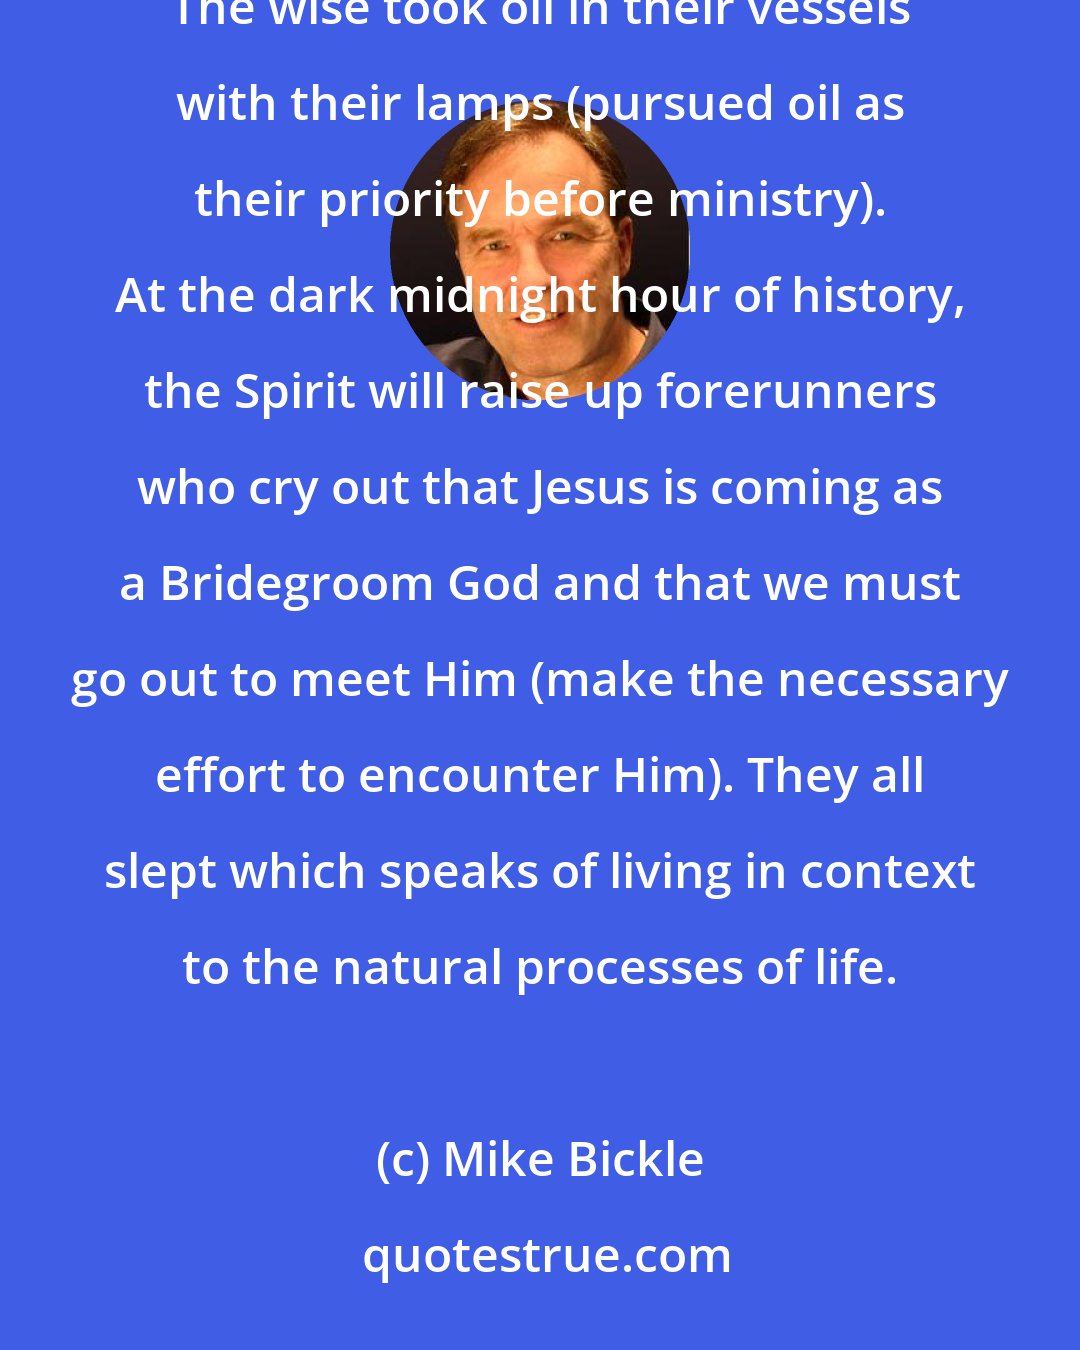 Mike Bickle: The foolish took their lamps, but took no oil (pursued ministry as their priority over getting oil). The wise took oil in their vessels with their lamps (pursued oil as their priority before ministry). At the dark midnight hour of history, the Spirit will raise up forerunners who cry out that Jesus is coming as a Bridegroom God and that we must go out to meet Him (make the necessary effort to encounter Him). They all slept which speaks of living in context to the natural processes of life.